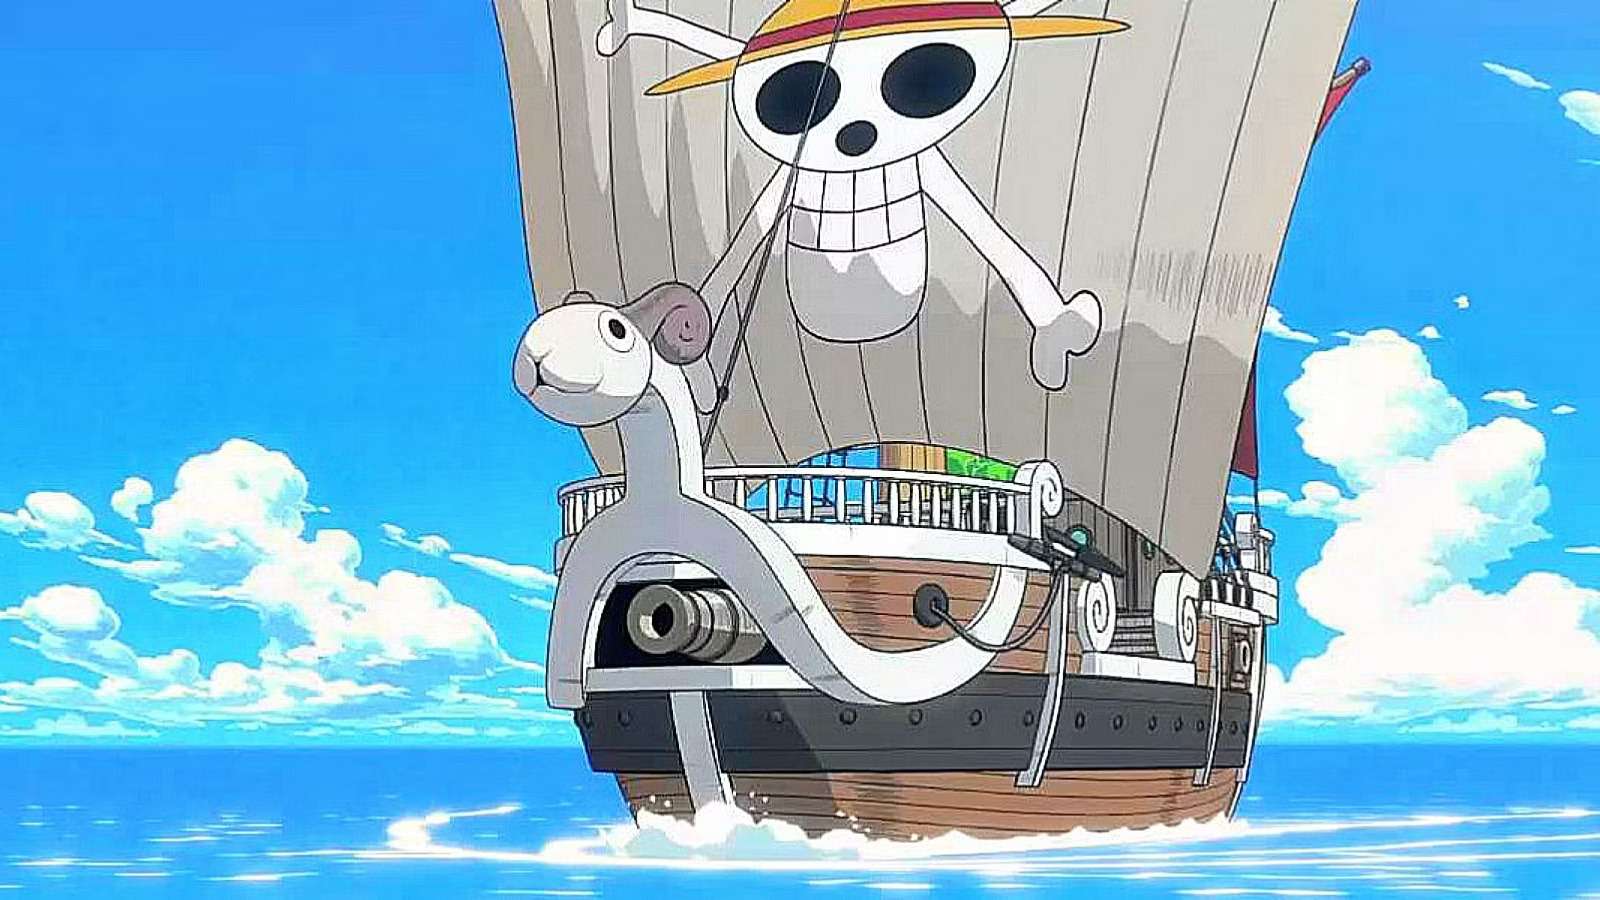 An image of Going Merry from One Piece